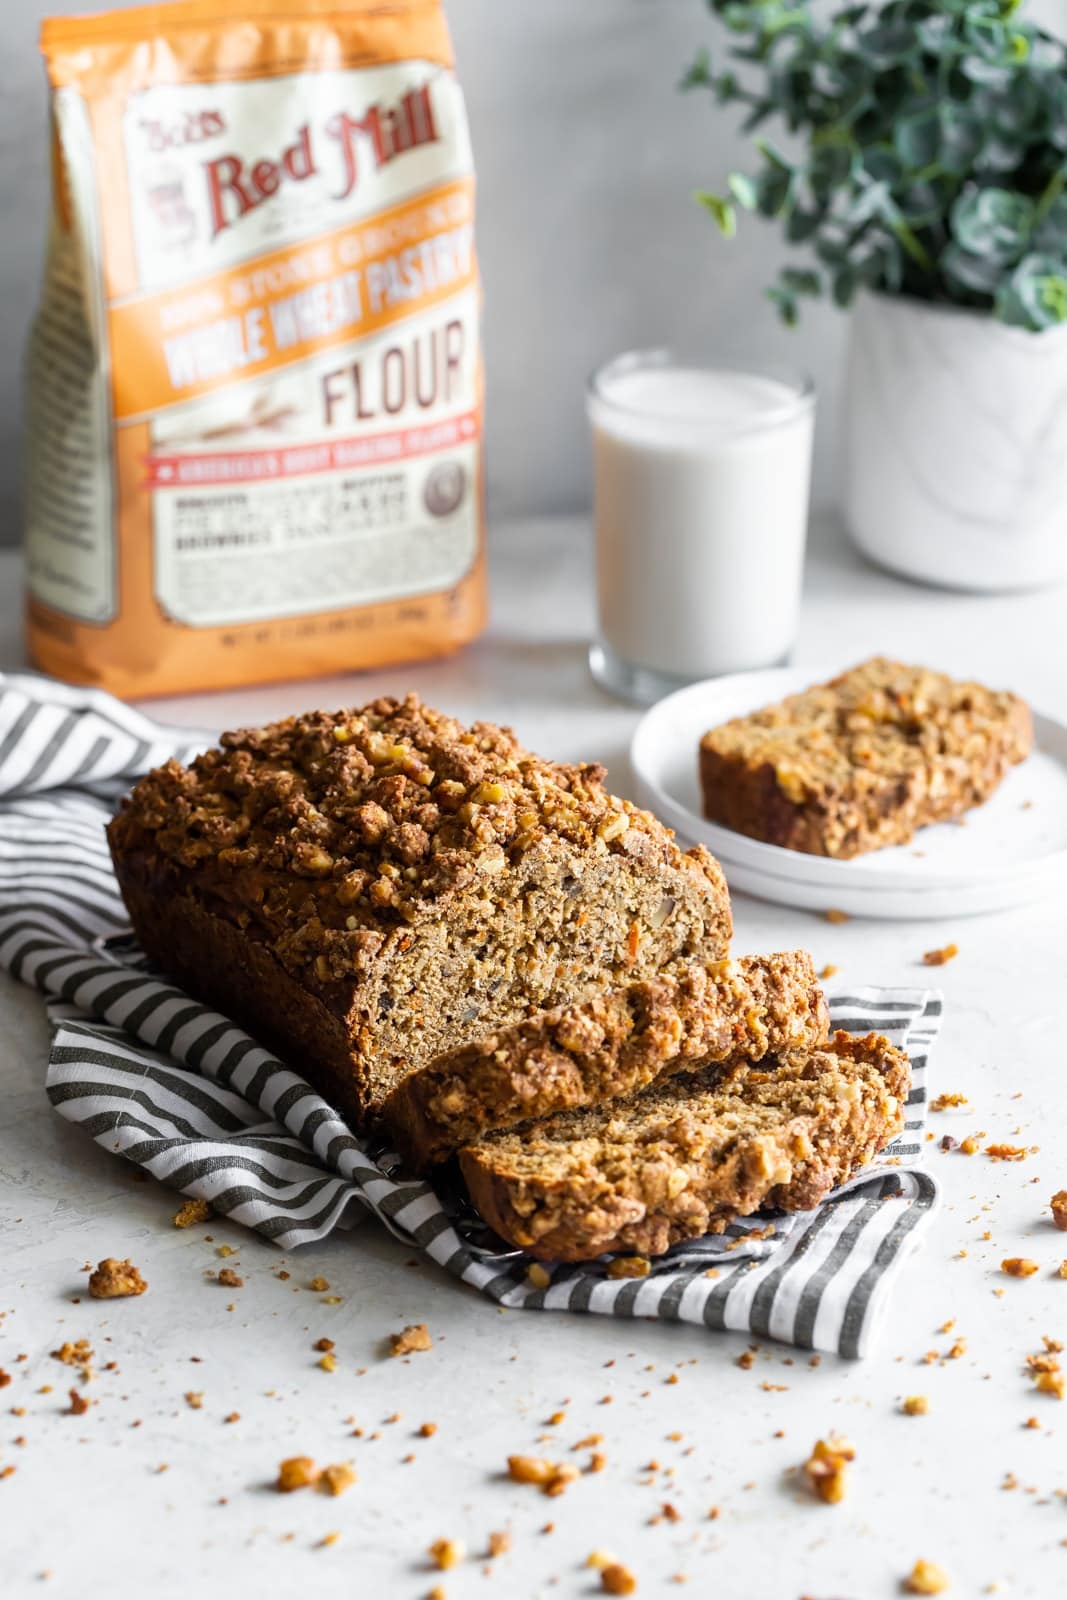 Dairy-free, refined sugar-free, moist carrot cake banana bread made with wholesome ingredients and a crunchy walnut crumble topping!